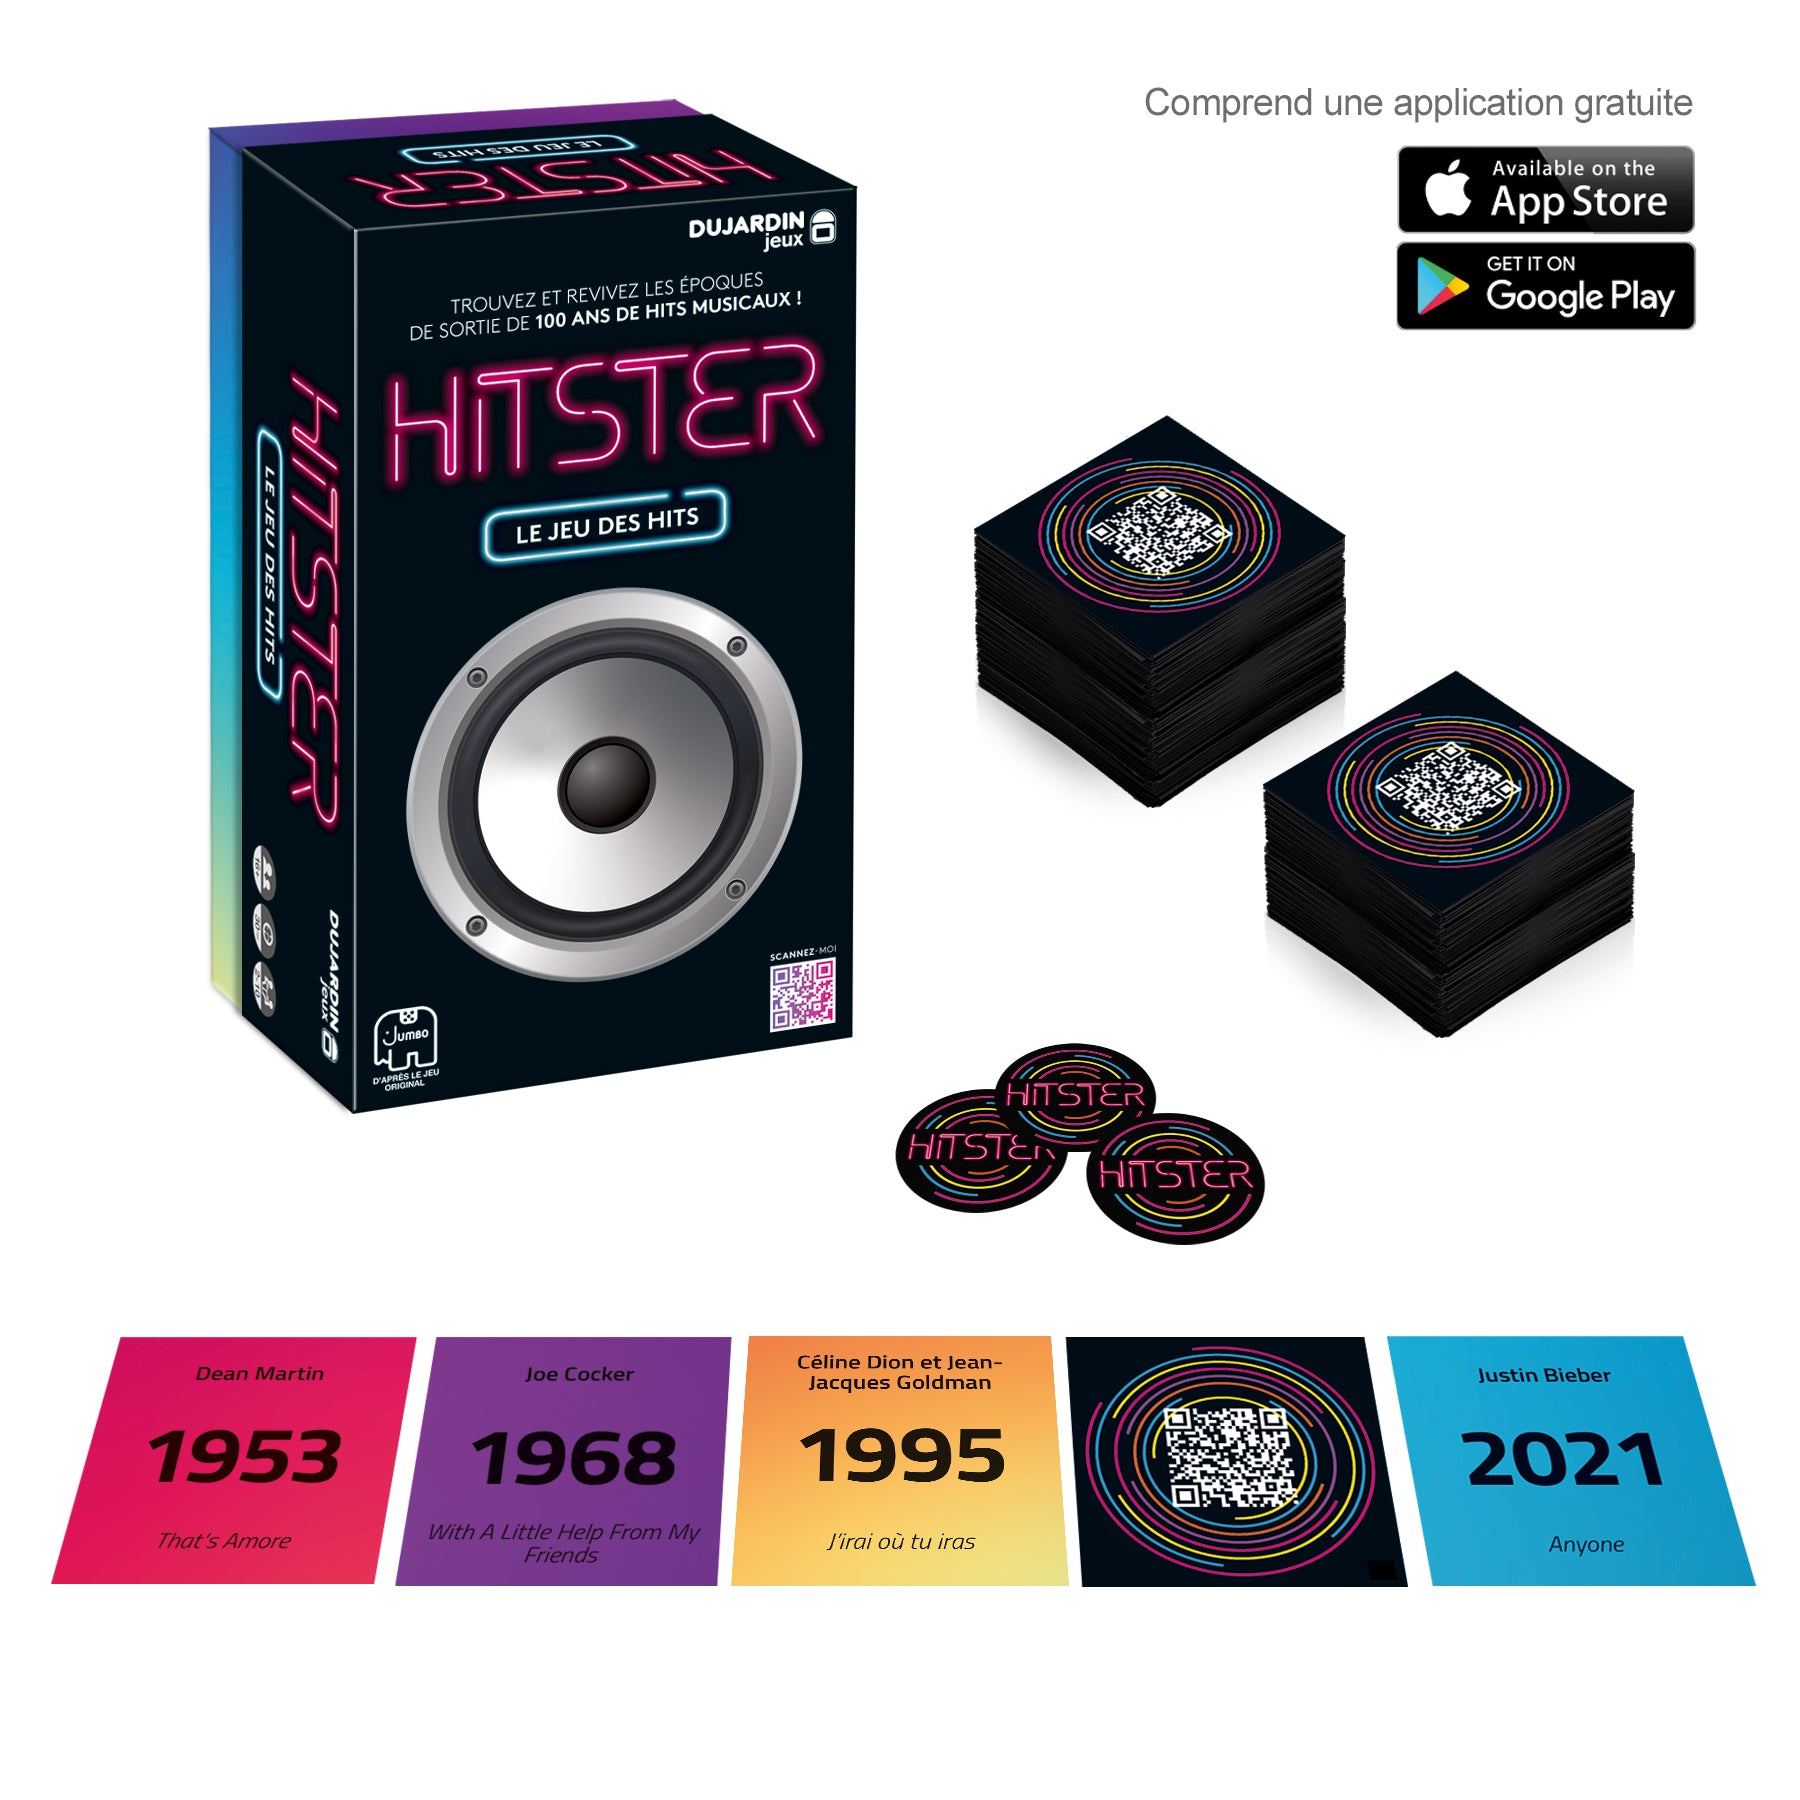 Hitster (édition française) - product image - Jumboplay.com